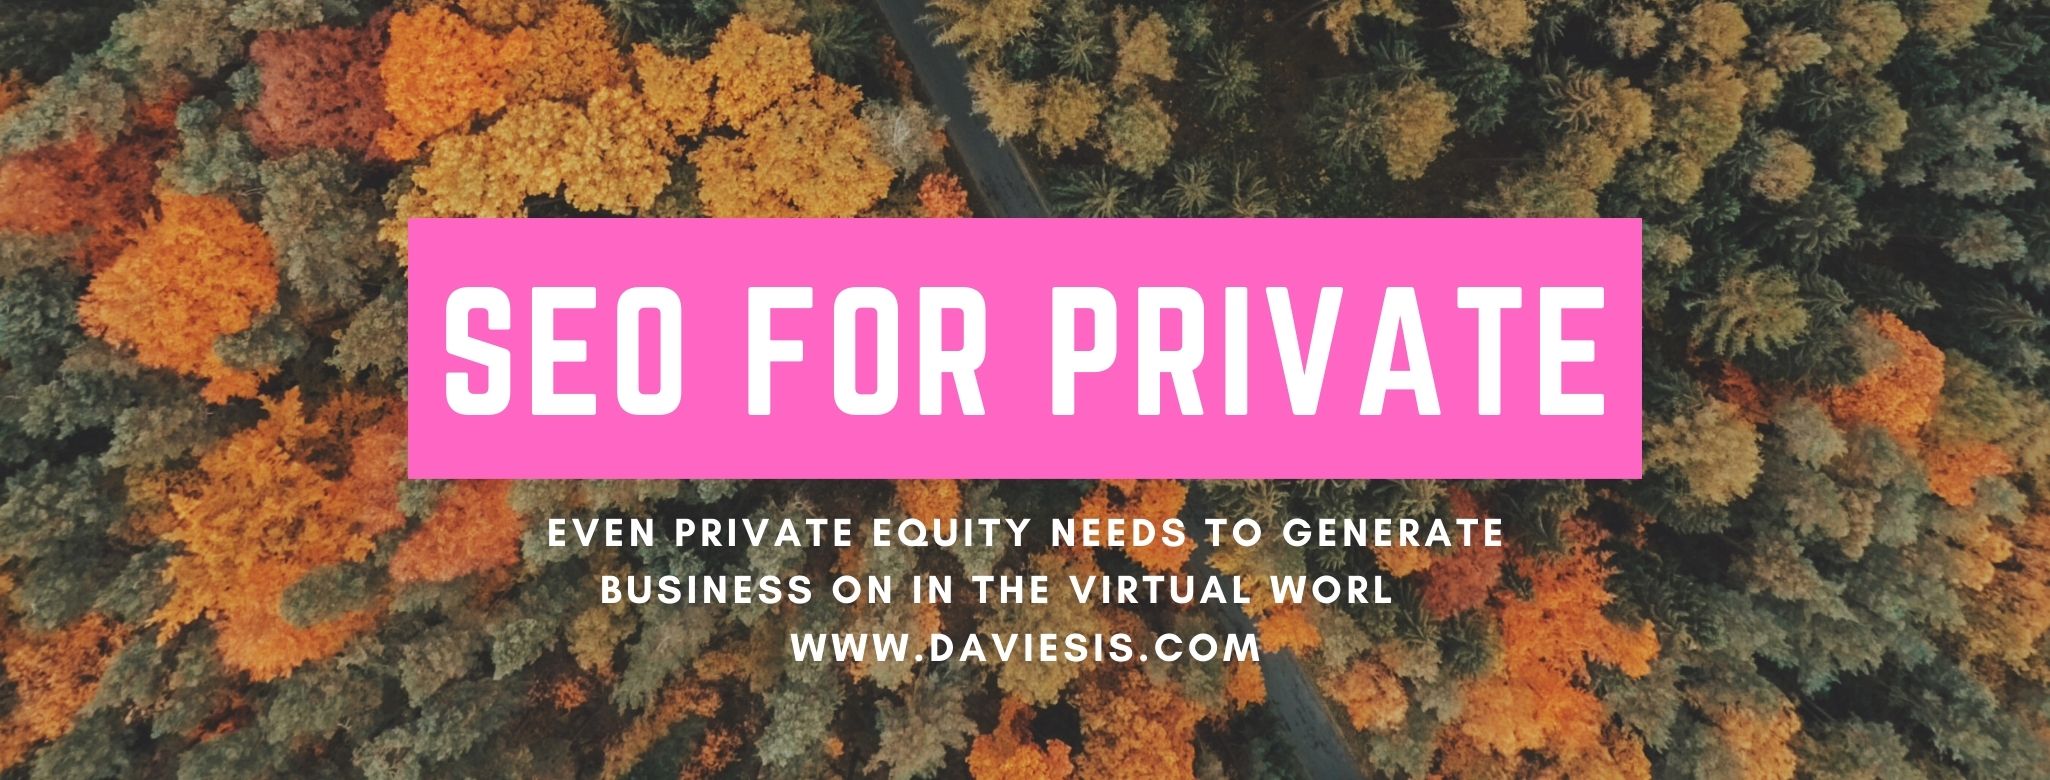 seo-for-private-equity-what-makes-seo-for-private-equity